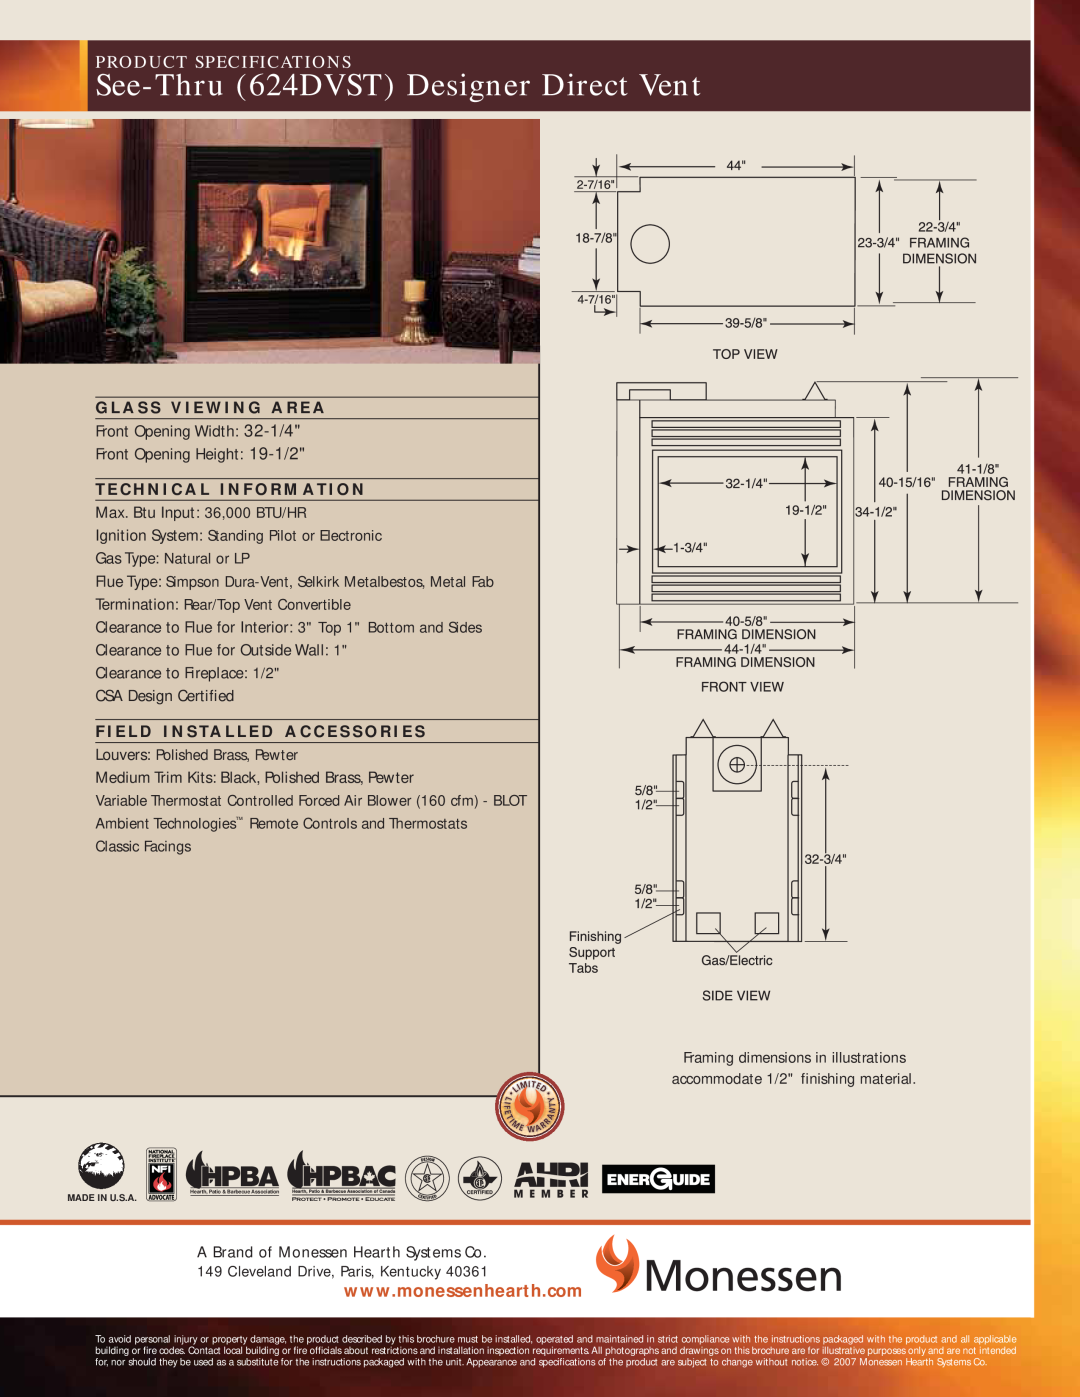 Monessen Hearth specifications See-Thru624DVST Designer Direct Vent, Product Specifications 